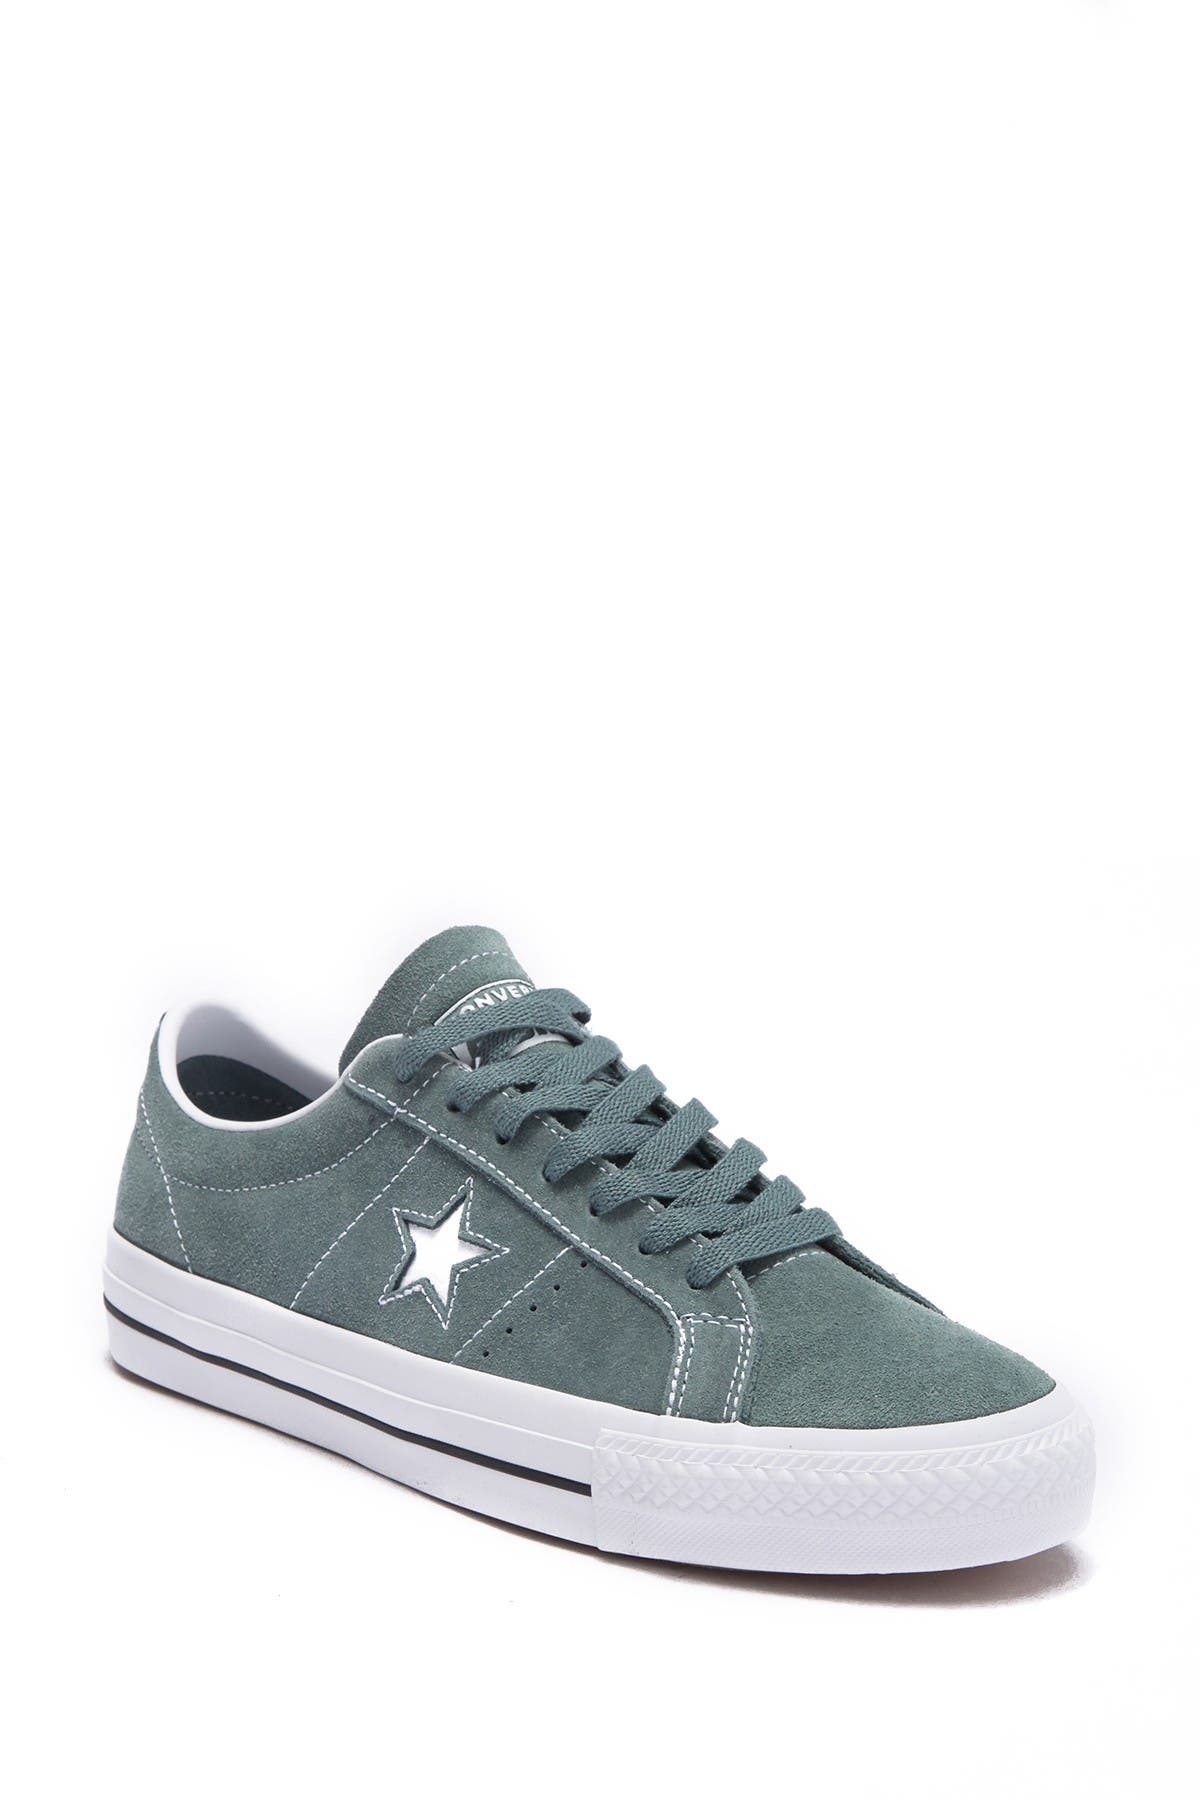 Converse | One Star Pro Oxford Suede 